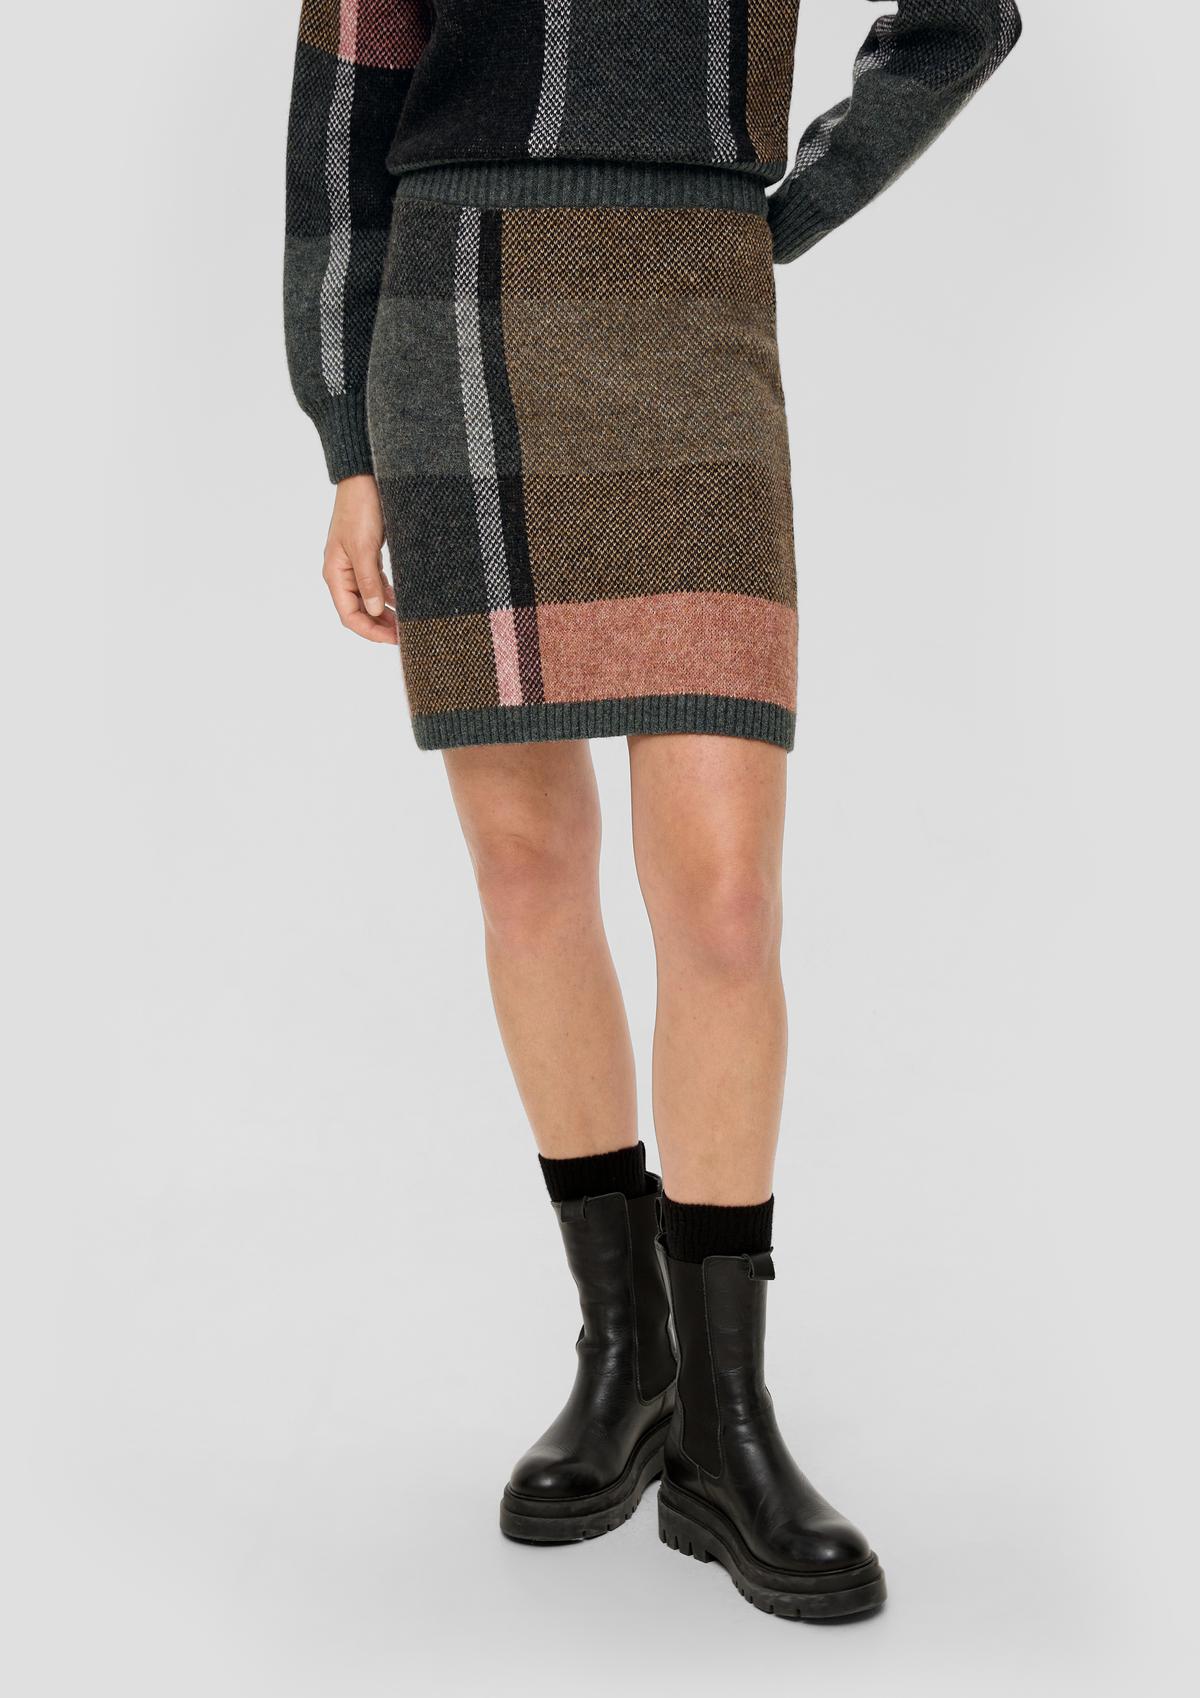 Knitted skirt with a check pattern - multicolor